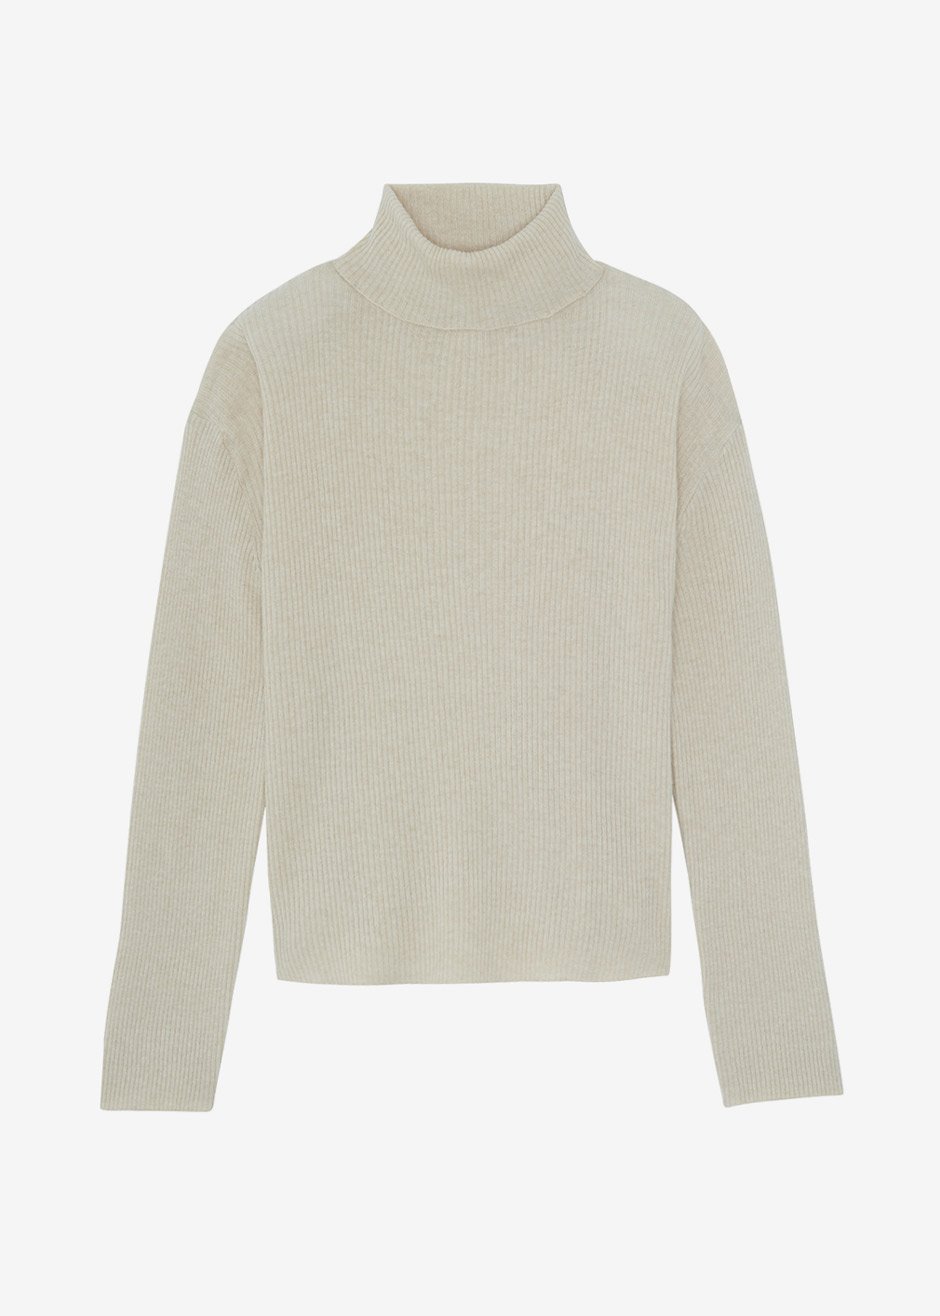 Ribbed Merino Knit Roll Neck Sweater in Shell